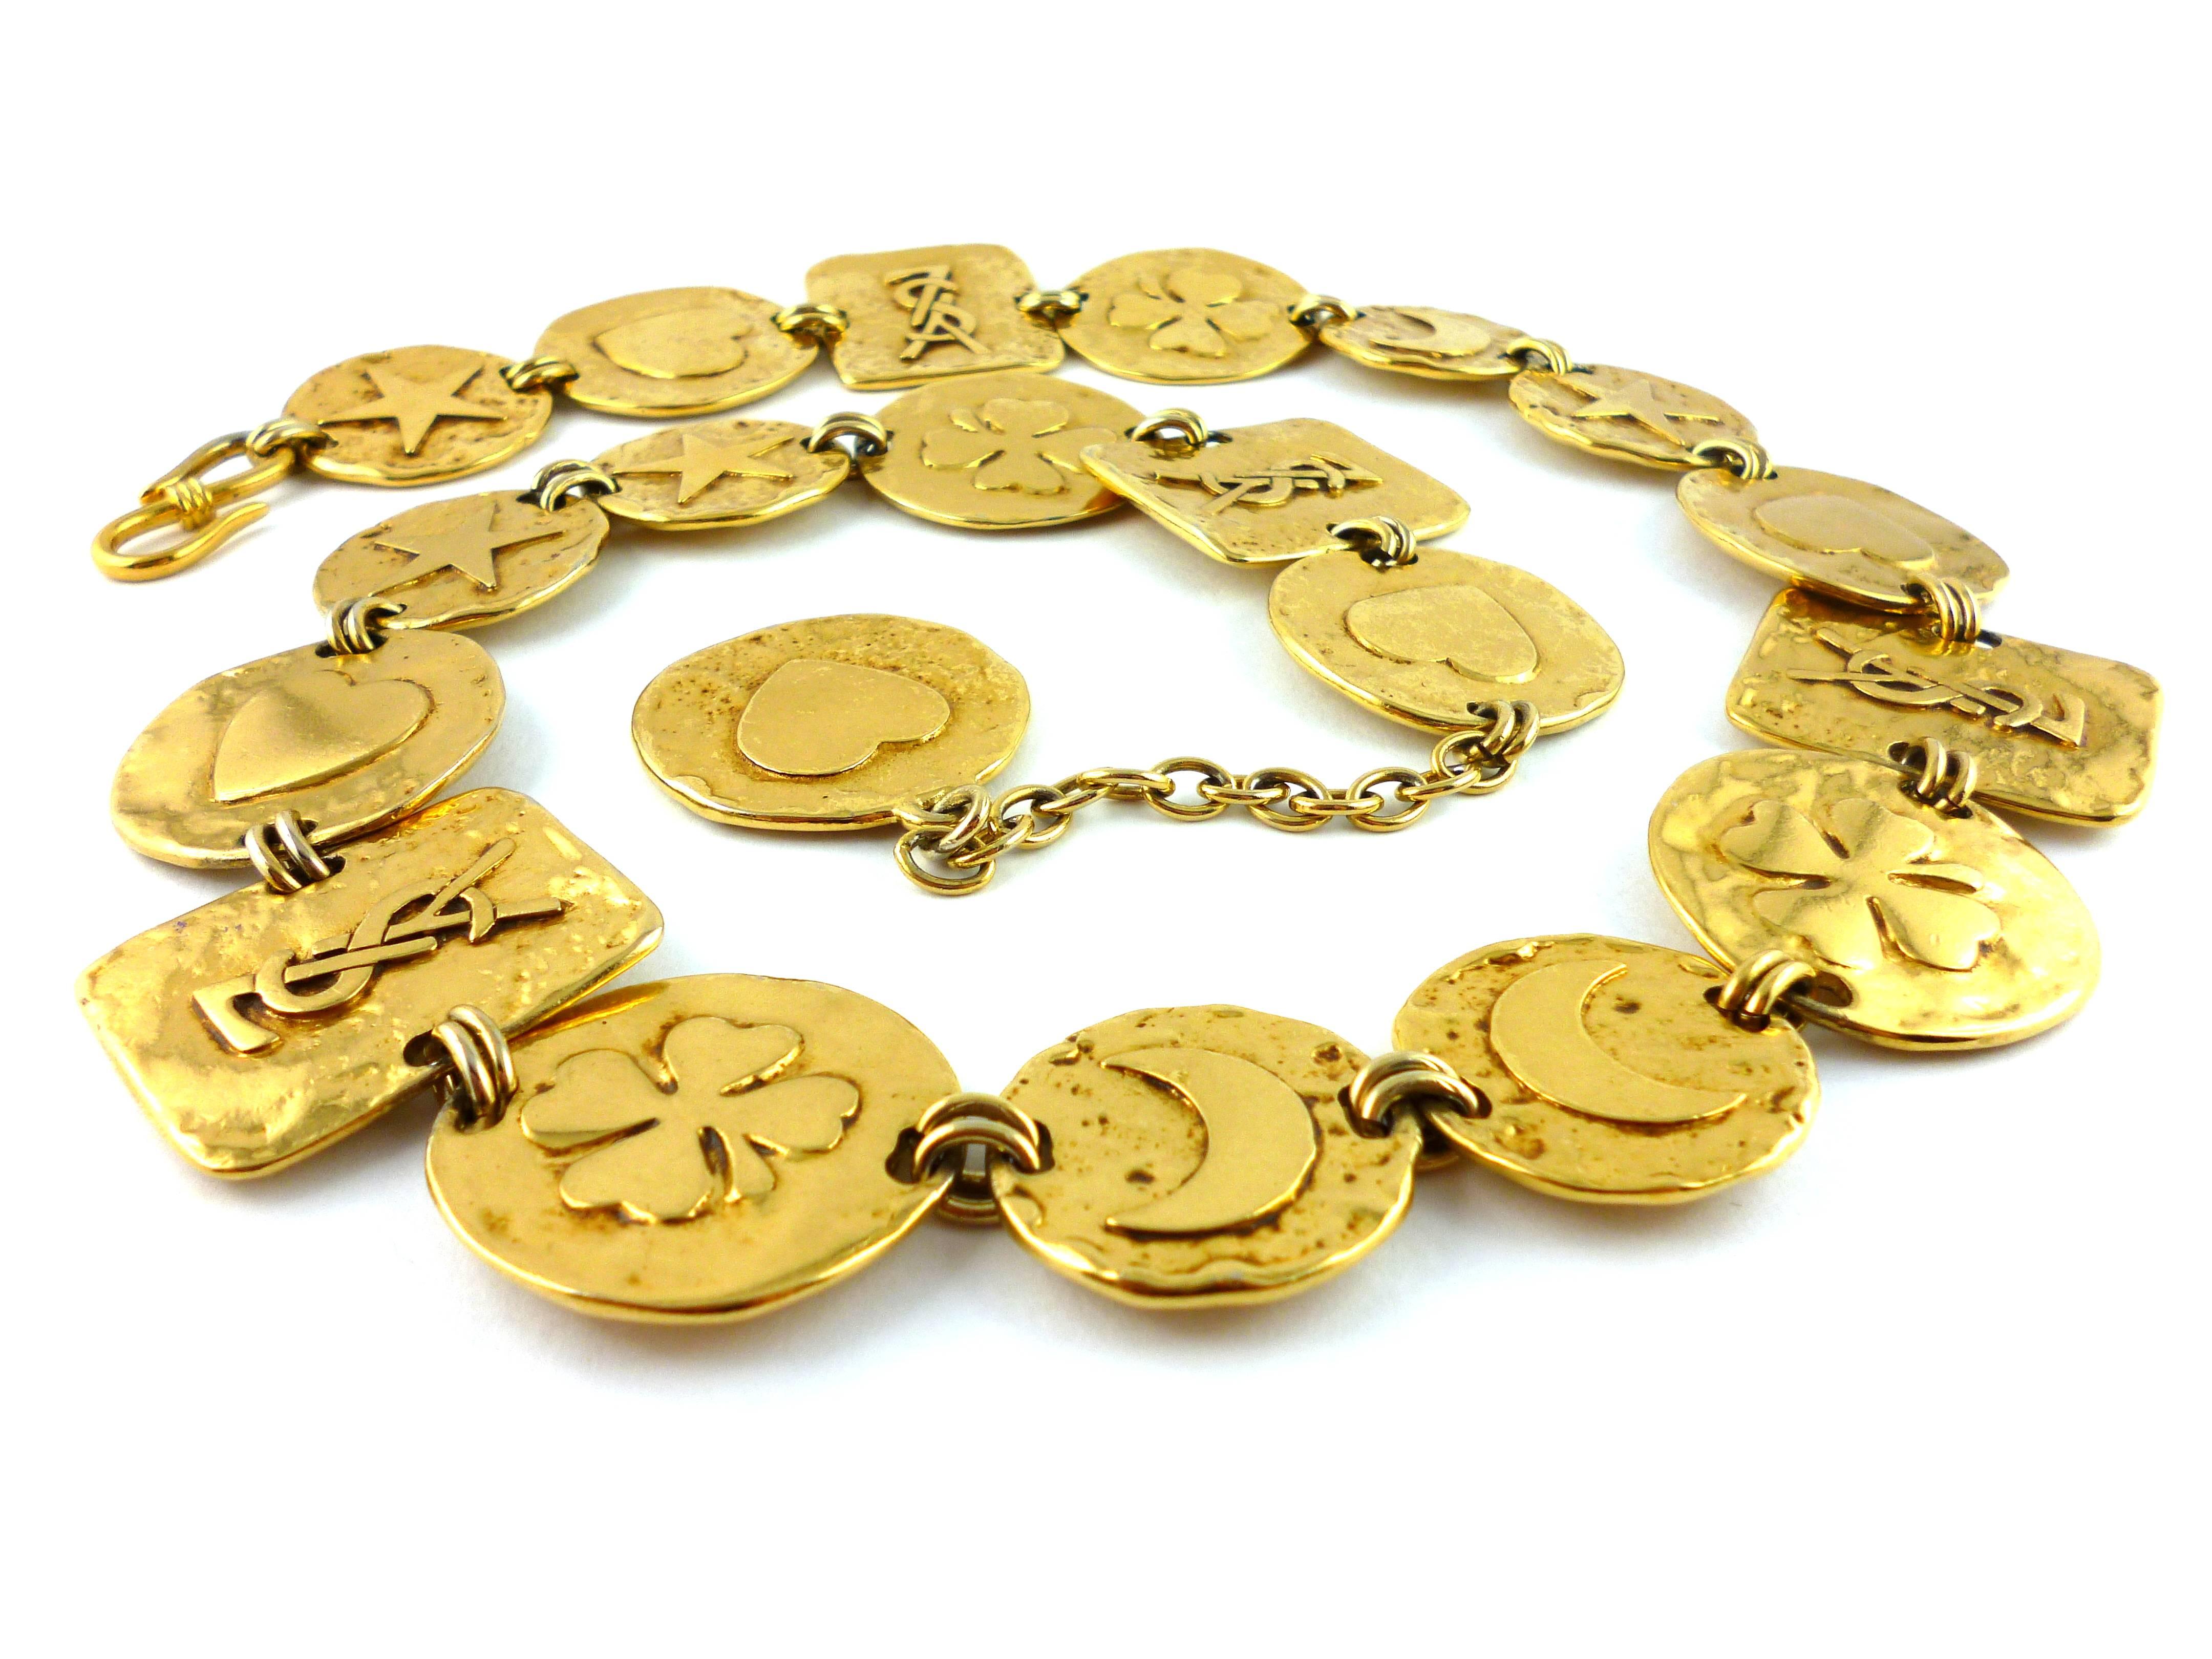 YVES SAINT LAURENT vintage belt/necklace featuring articulated gold tone square plates and coins engraved with iconic symbols :  crescent moons, stars, clovers, hearts and 